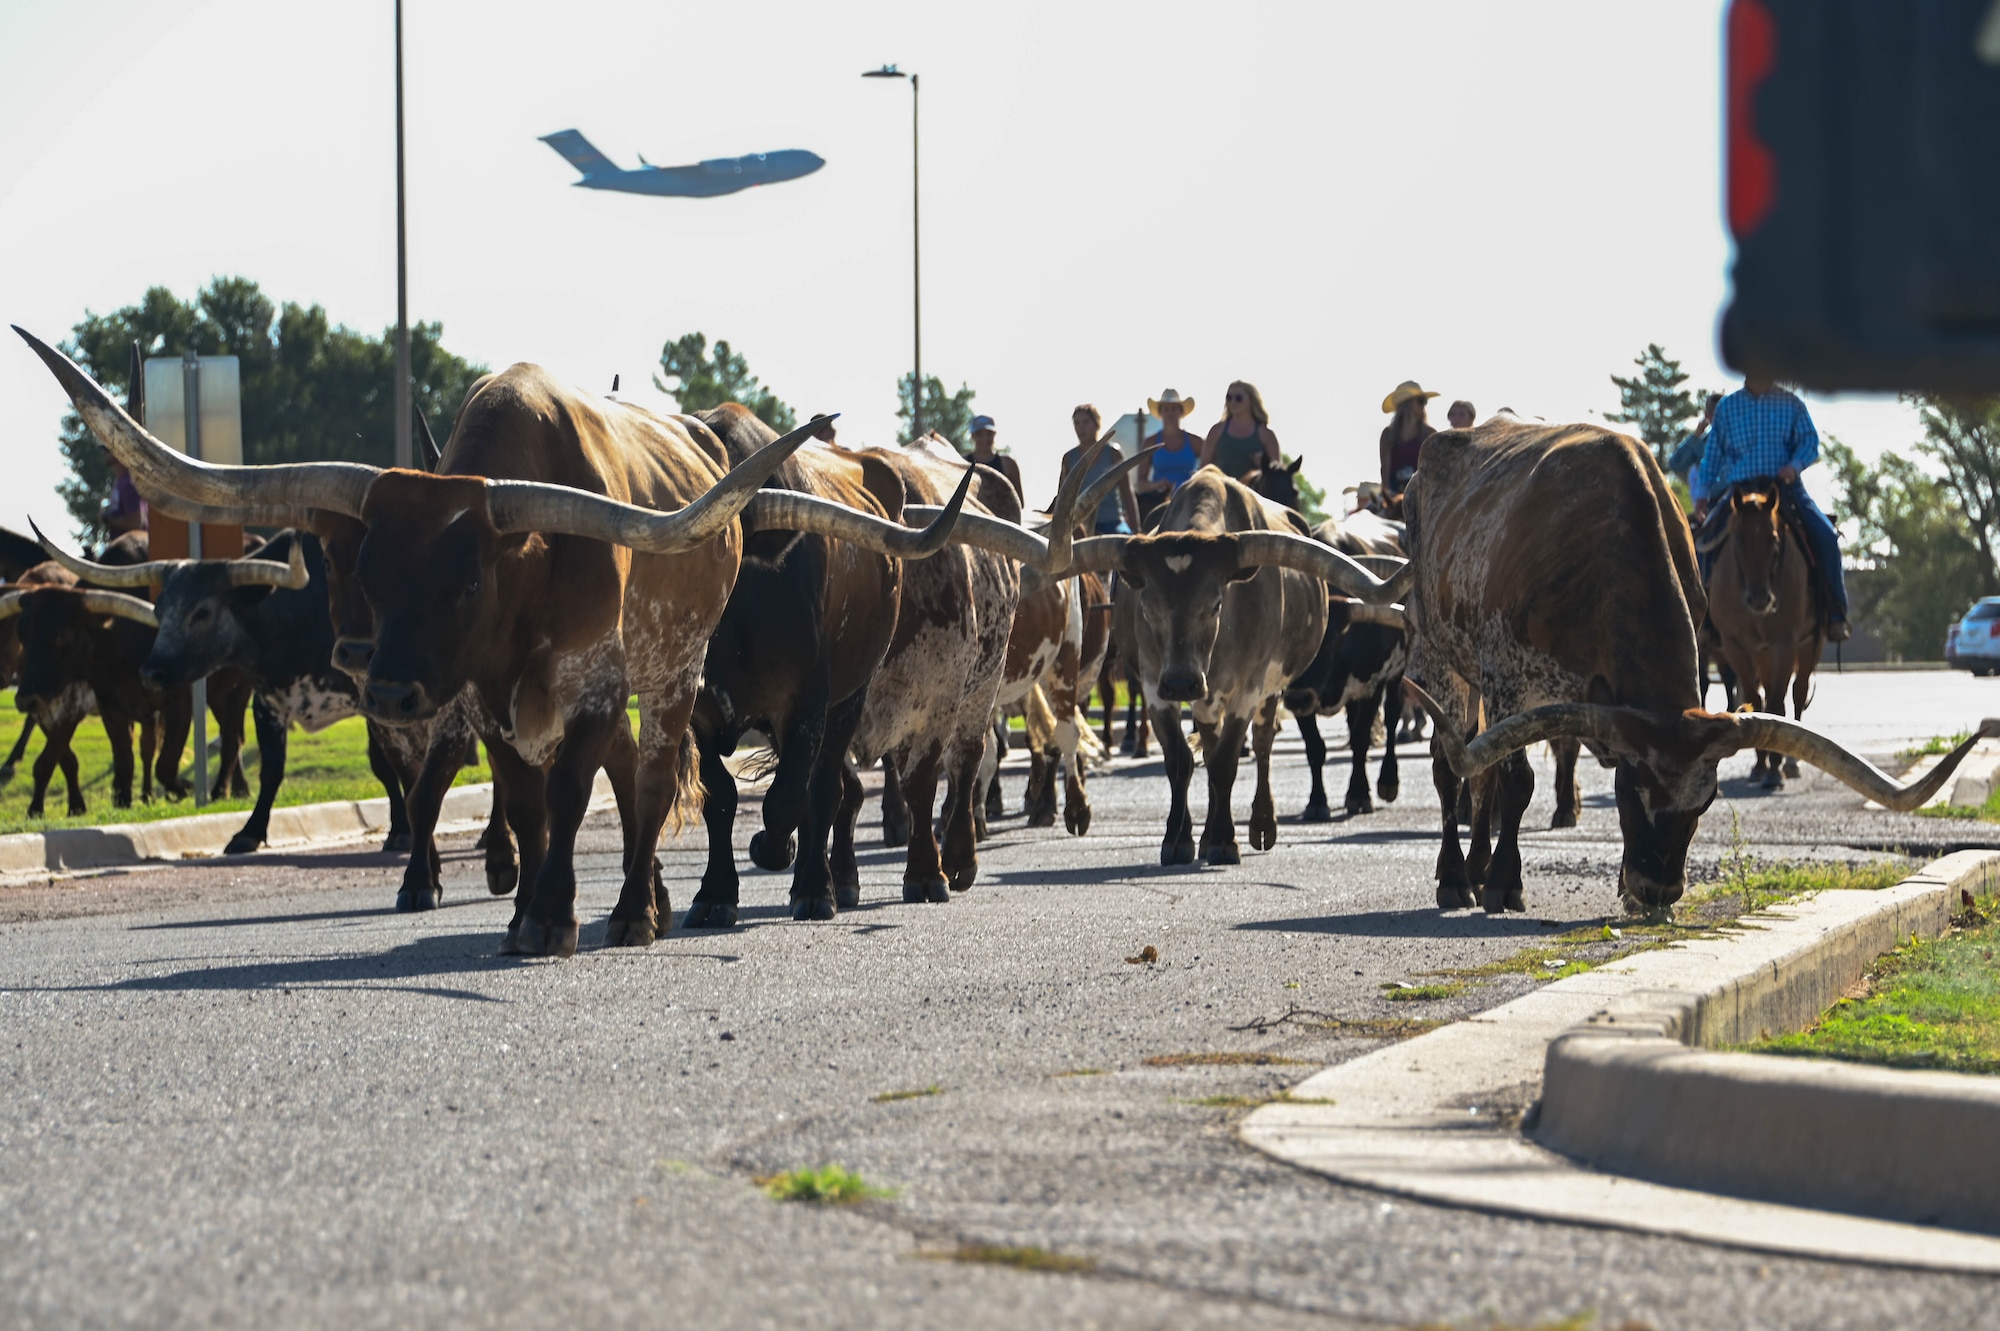 Longhorn cattle enter Altus Air Force Base (AFB), Oklahoma, during the 25th Annual Cattle Drive on Aug. 24, 2023. Altus AFB holds the Annual Cattle Drive yearly to pay homage to the ‘Great Western Cattle Trail,’ which was established in 1874 by rancher John T. Lyte. (U.S. Air Force photo by Airman 1st Class Heidi Bucins)